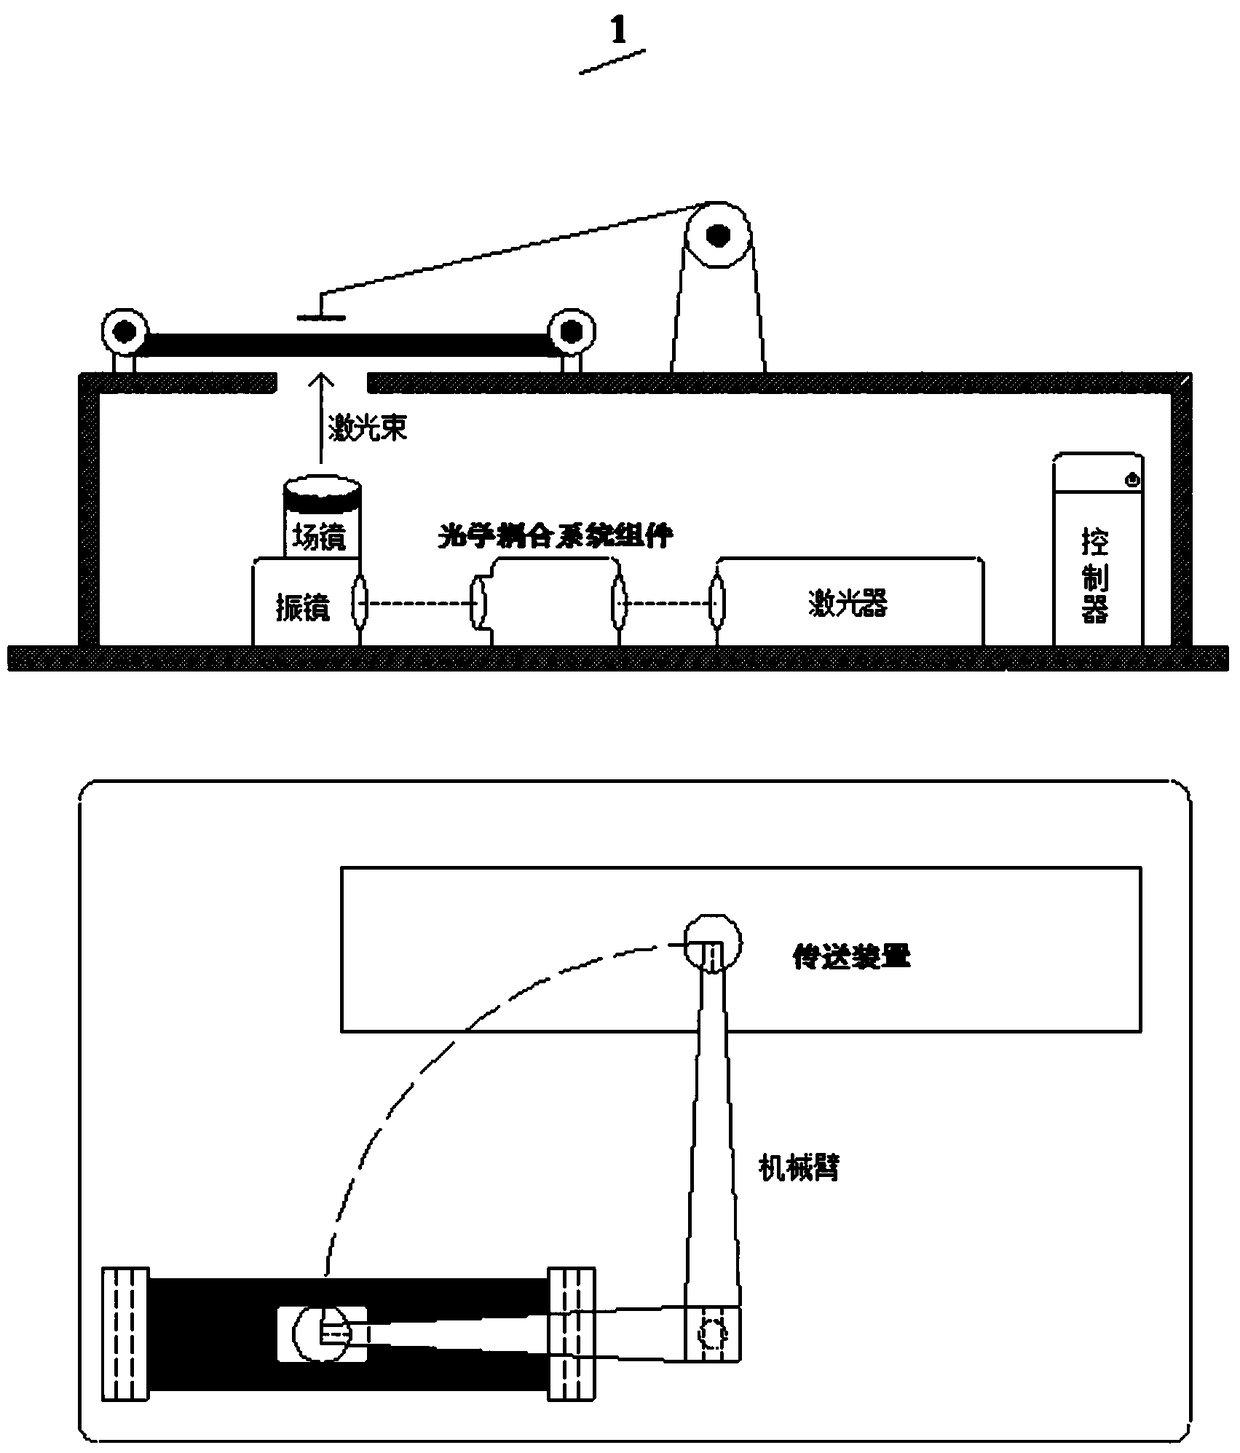 Roll-to-roll covering film laser cutting system and cutting method